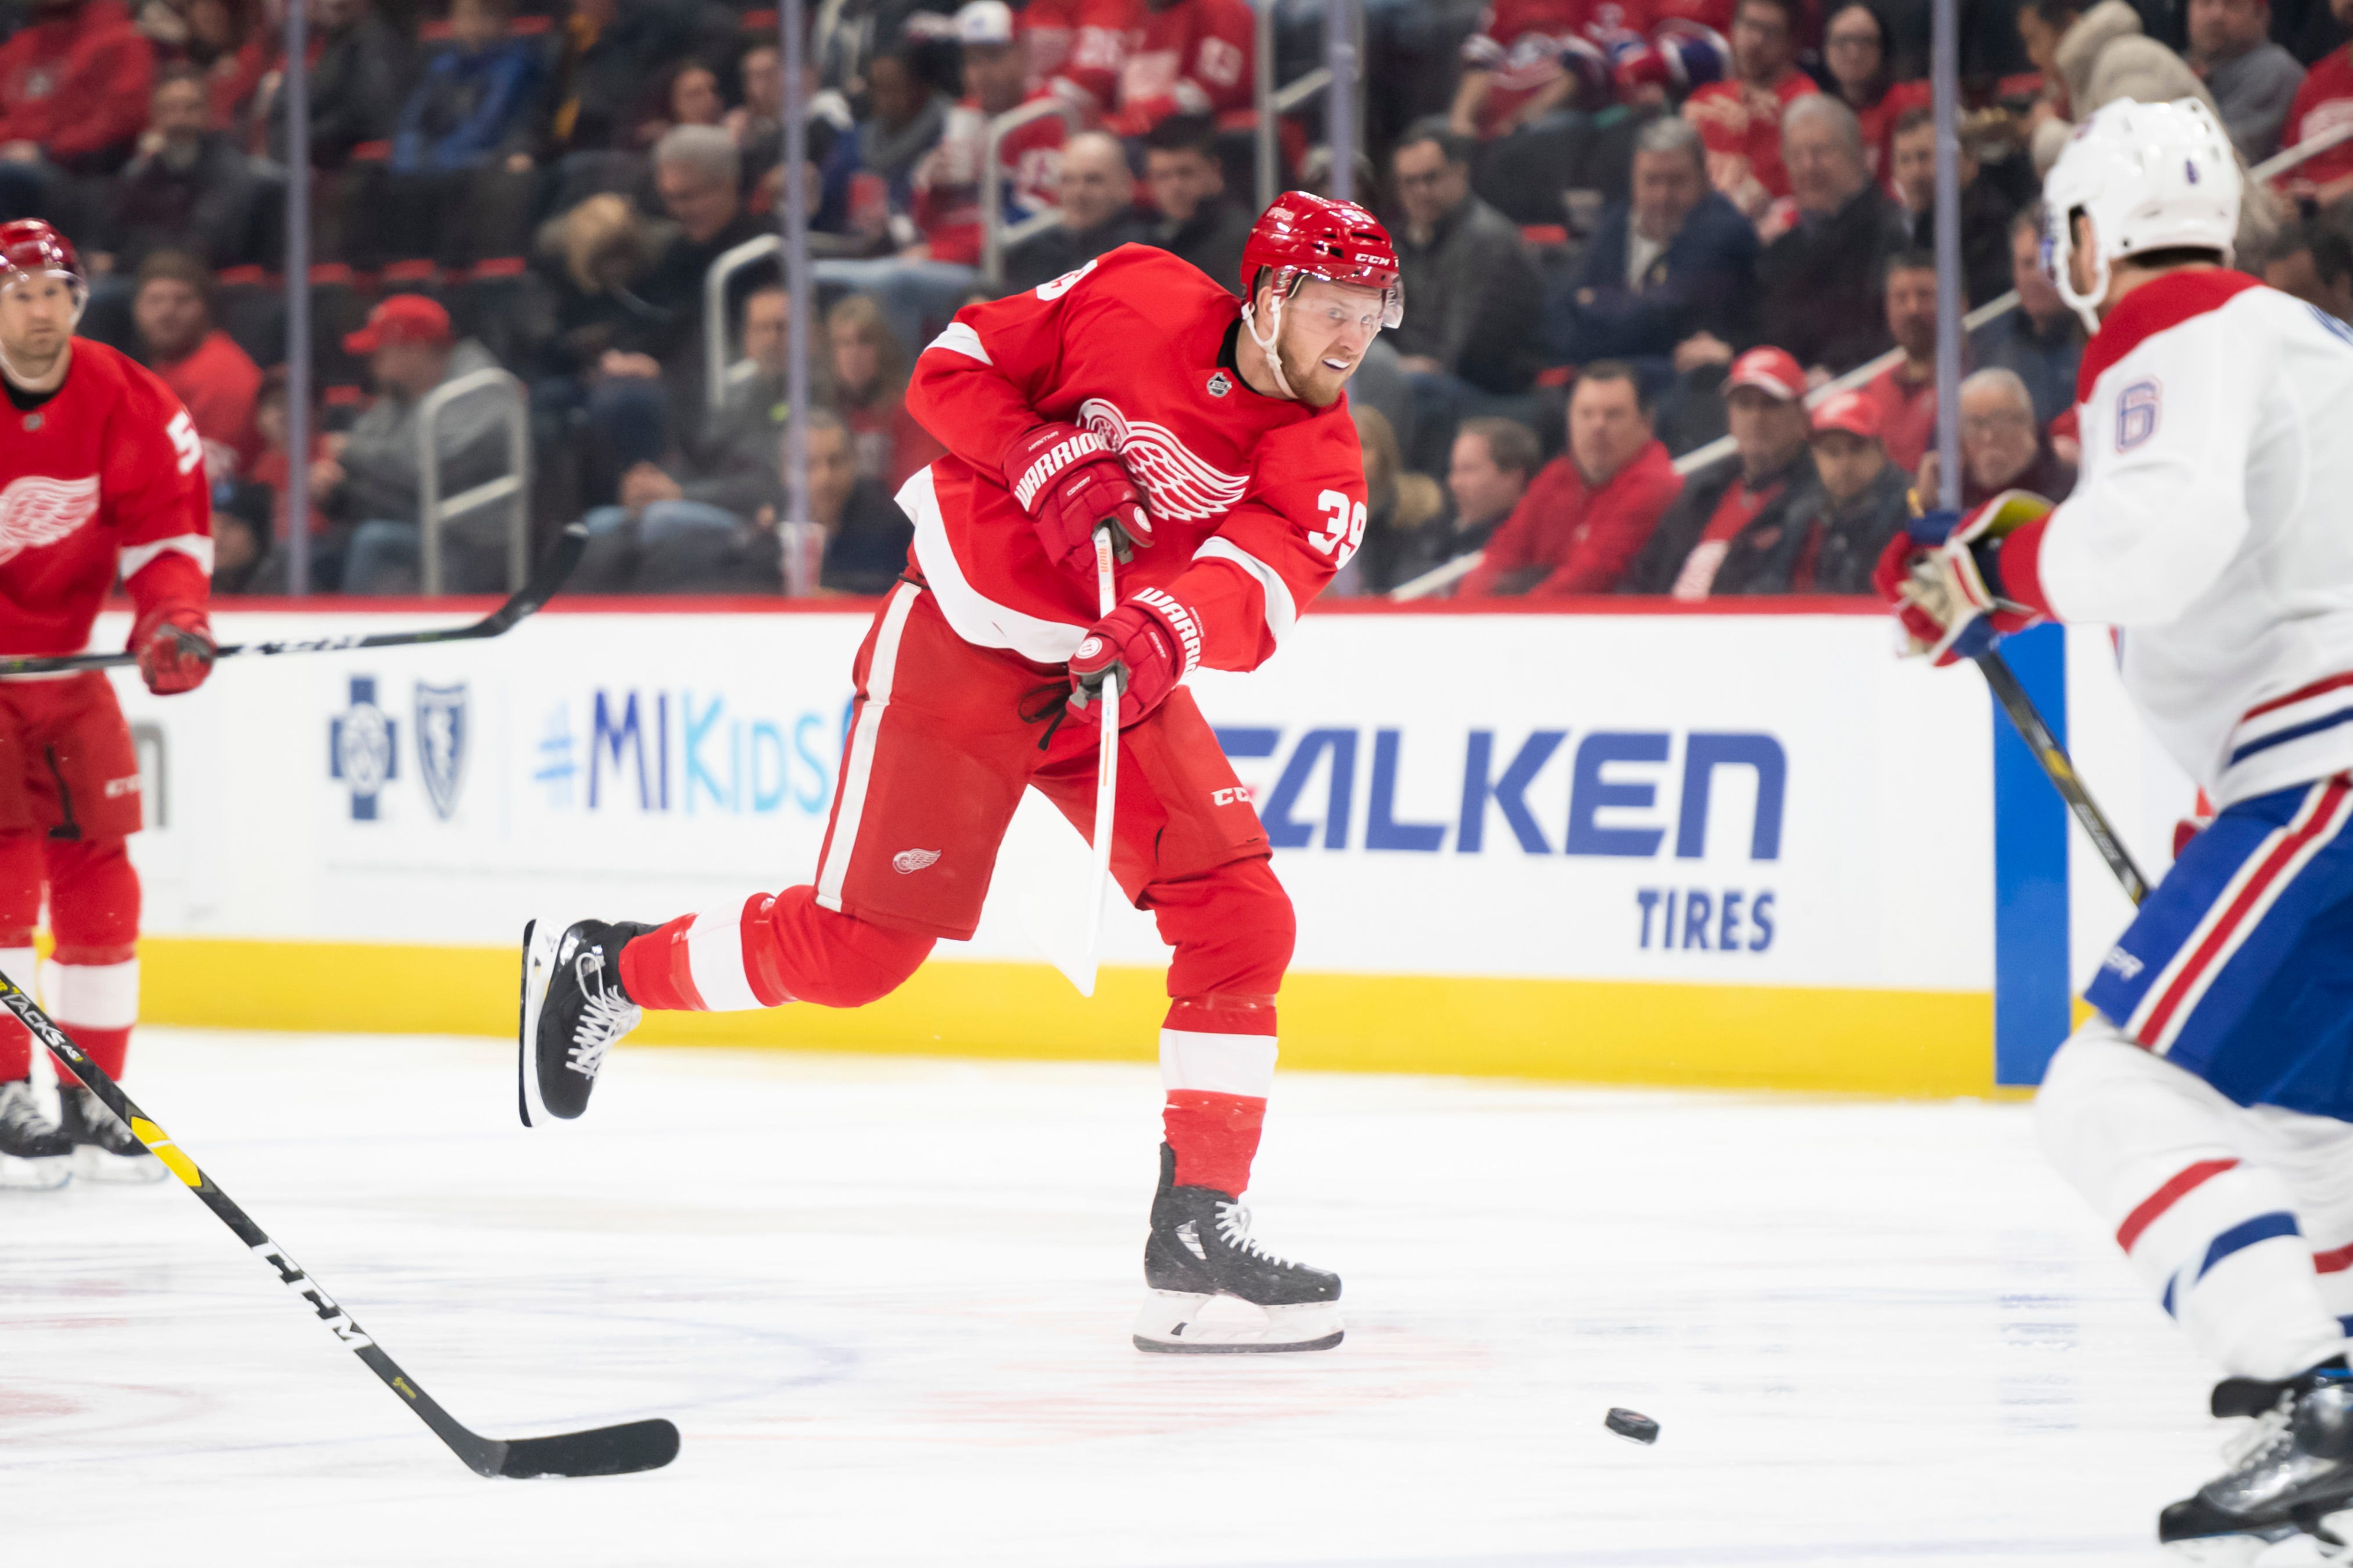 6. Anthony Mantha, right wing. Mantha had 25 goals and 48 points in 67 games, and cemented his position among the organization’s building blocks. A gifted scorer, underrated passer, and physical when the need arises, Mantha is gradually erasing concerns regarding his inconsistency.